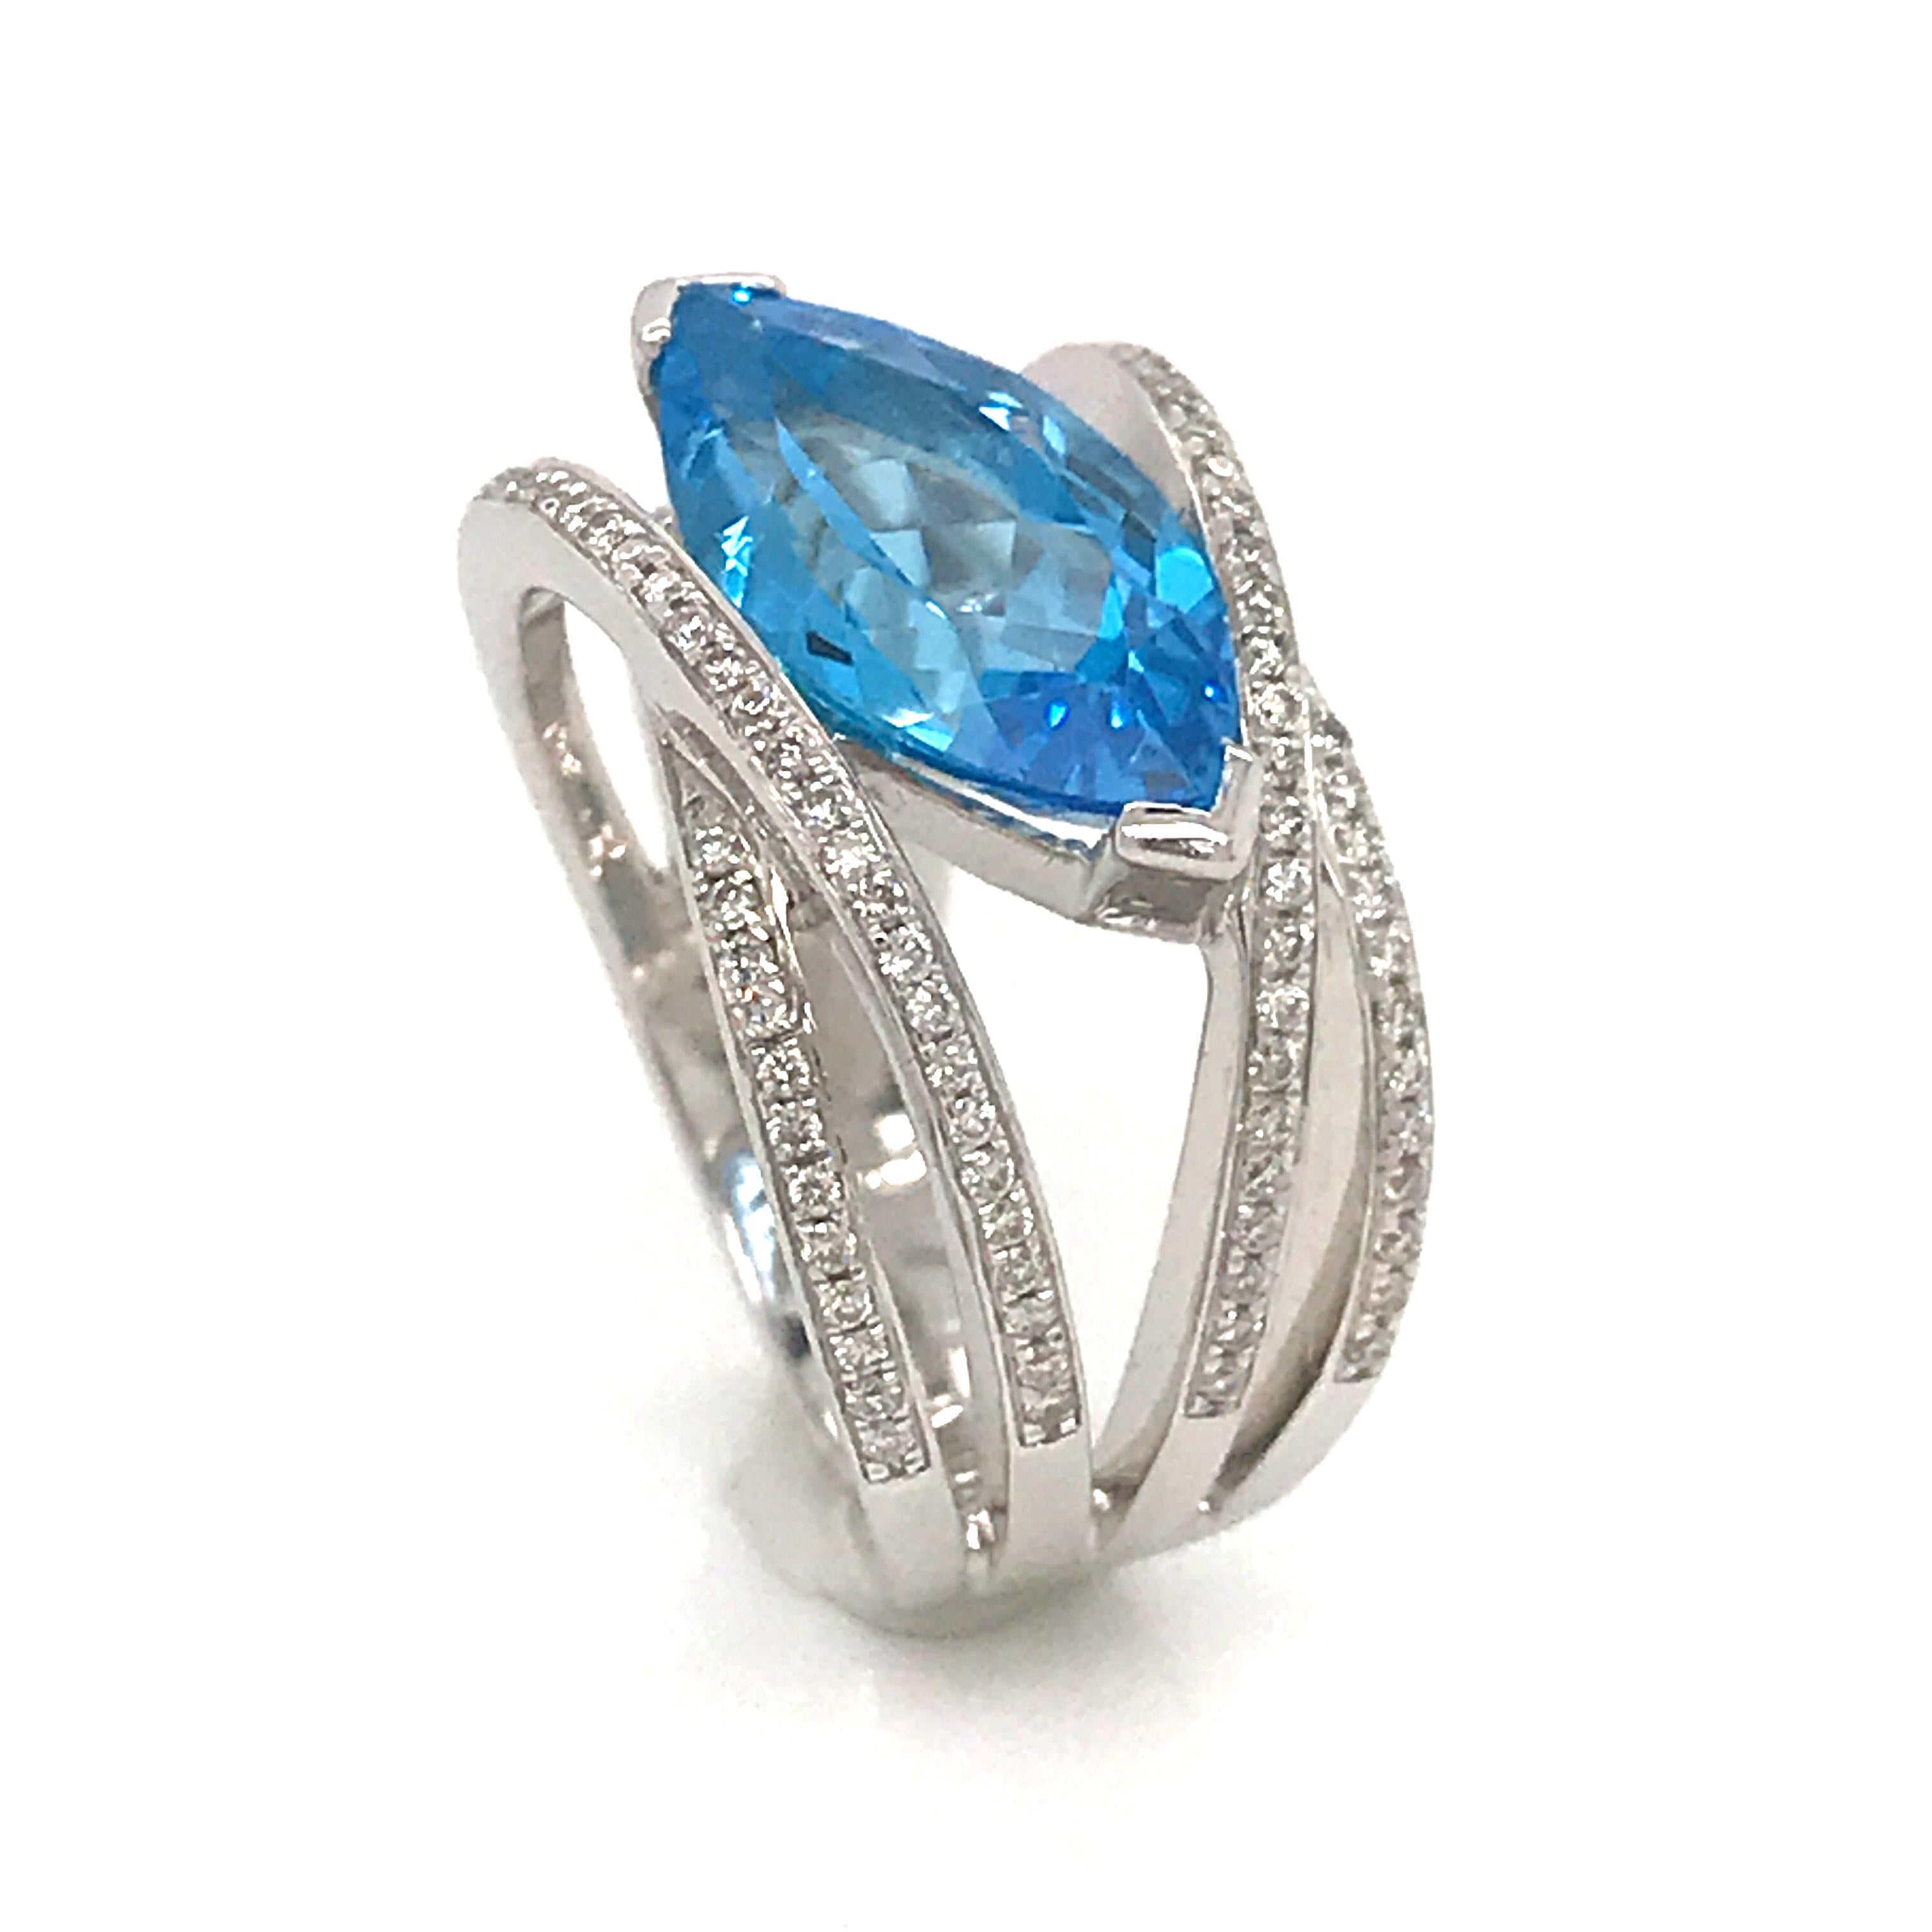 Discover this Creation Fashion ring Marquise Shape with Blue Topaz of 0.42 ct From Brazil 
Decorated with diamonds Color G-VS 0.83 ct 
White Gold 18 k / 8.4 grams 
French Size 54
US Size 7